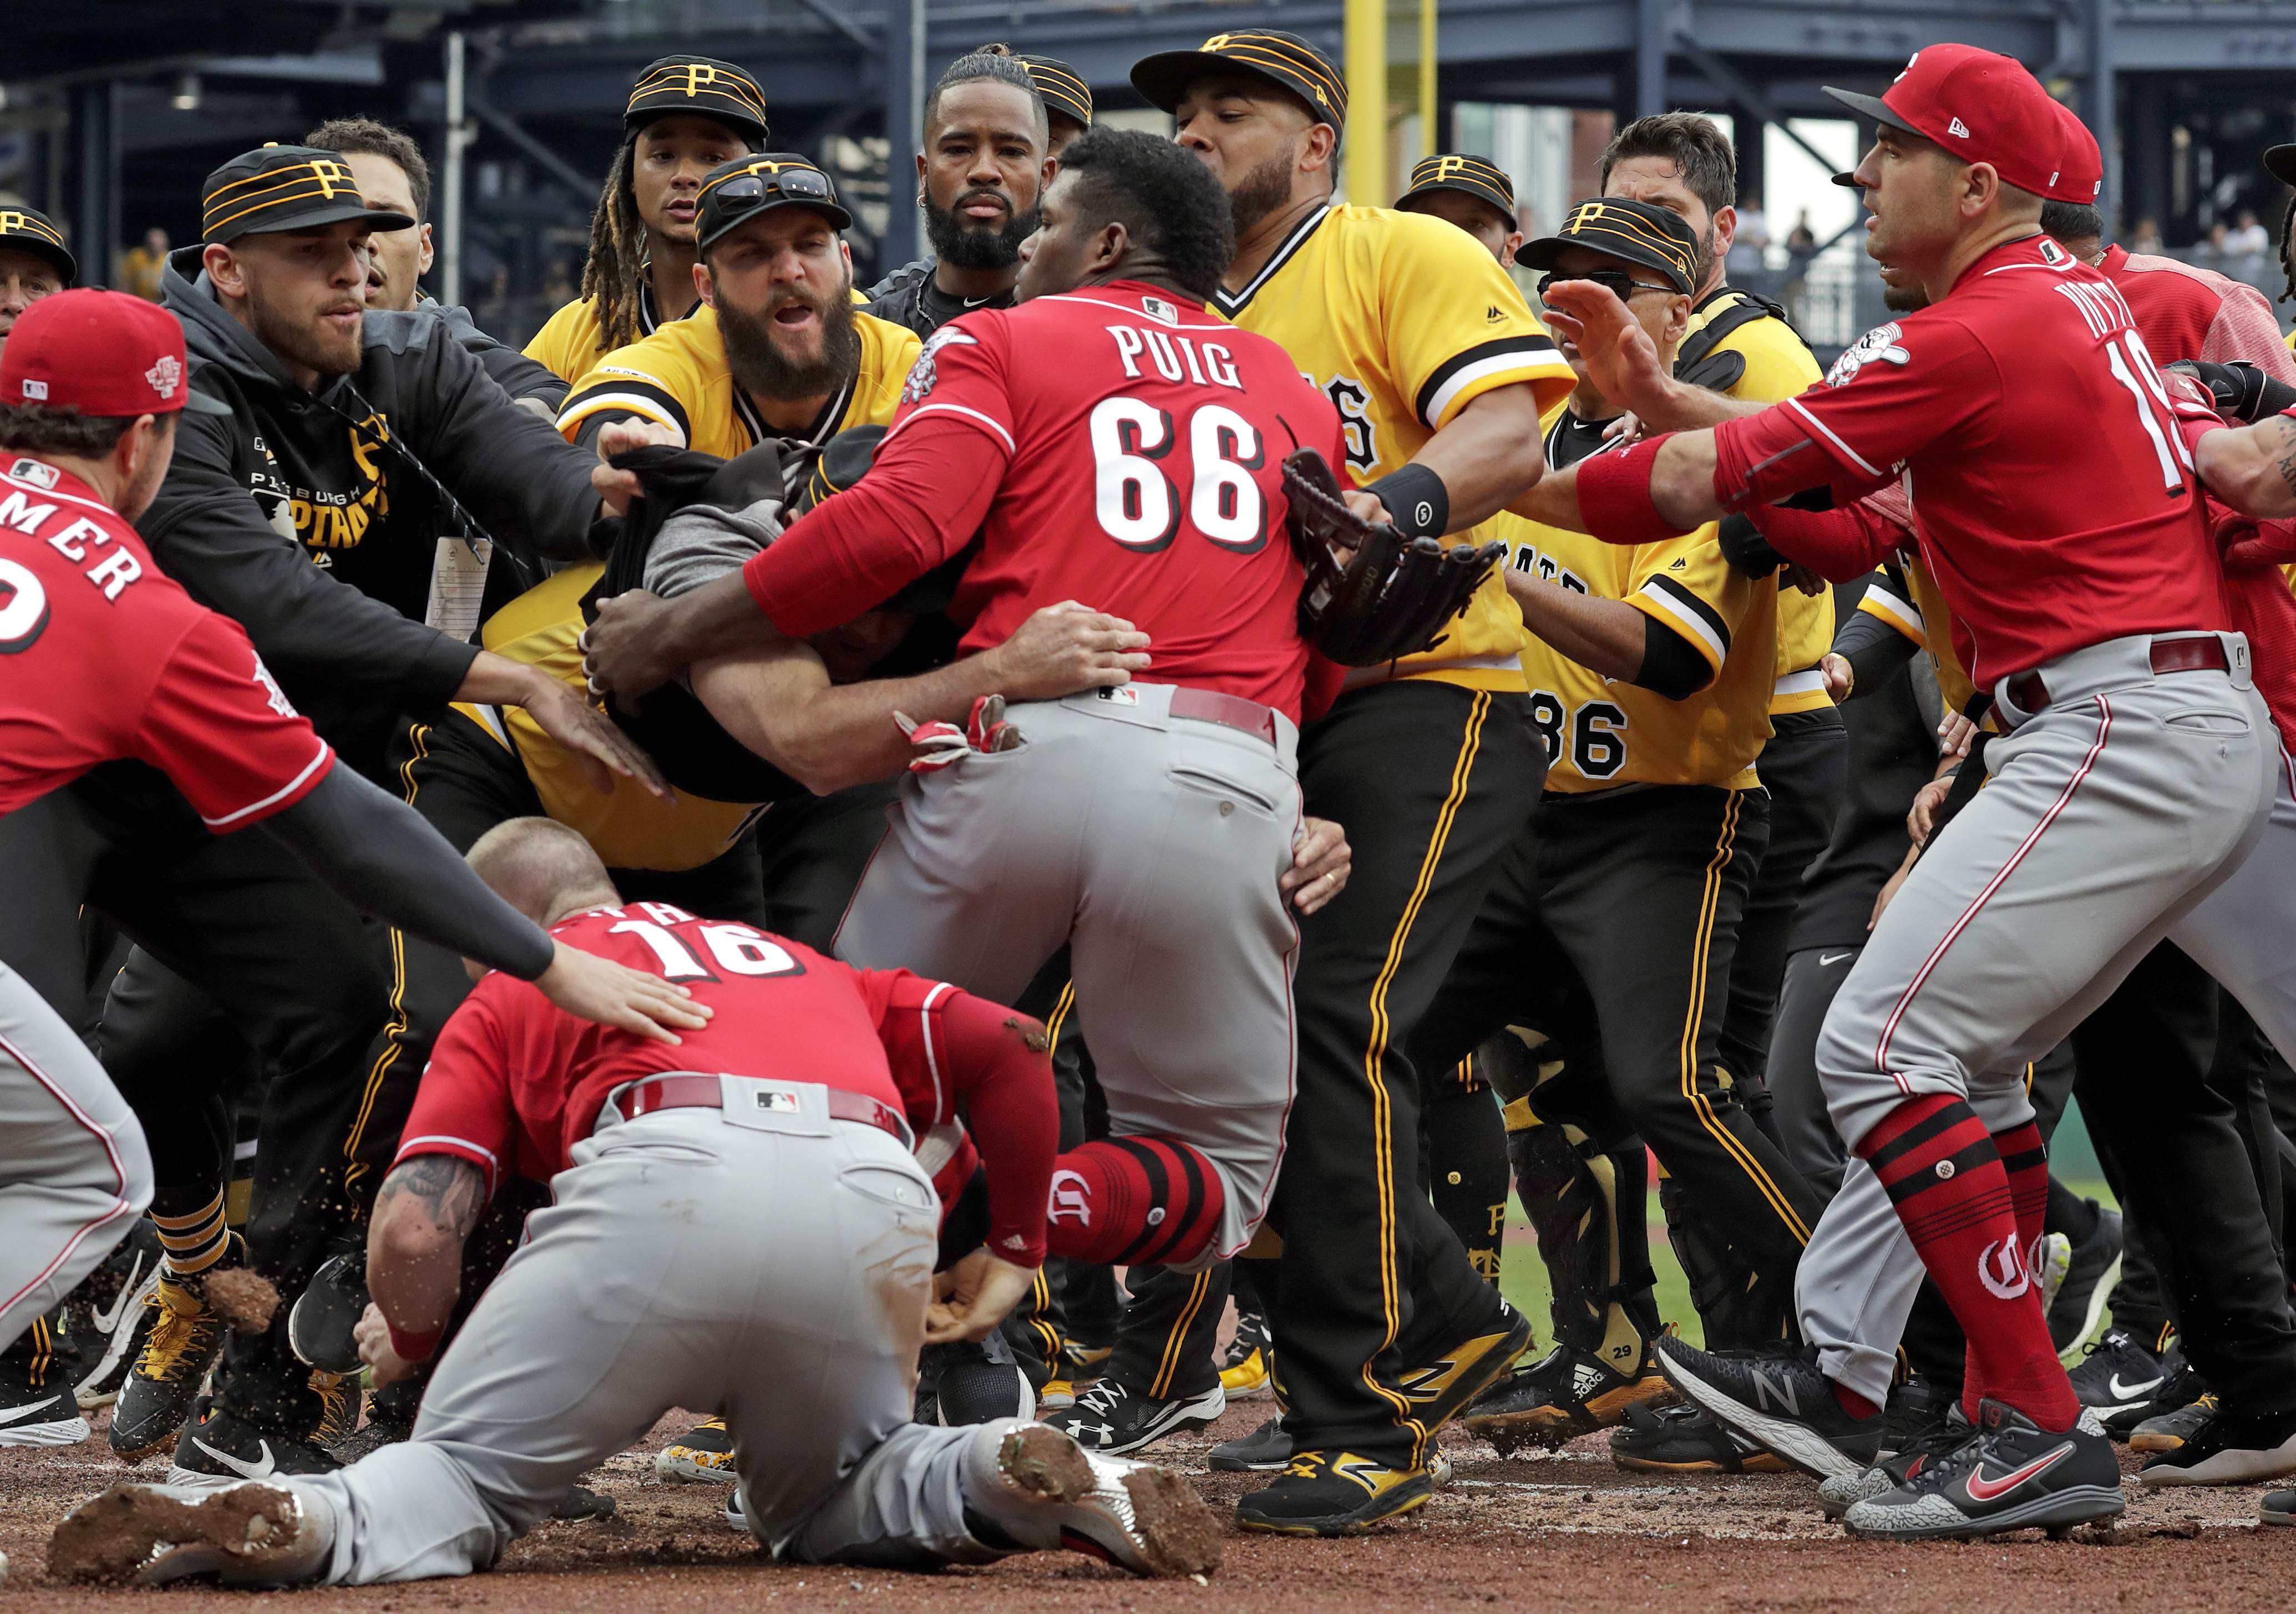 How a Chris Archer pitch ignited a benches-clearing brawl between Reds and  Pirates